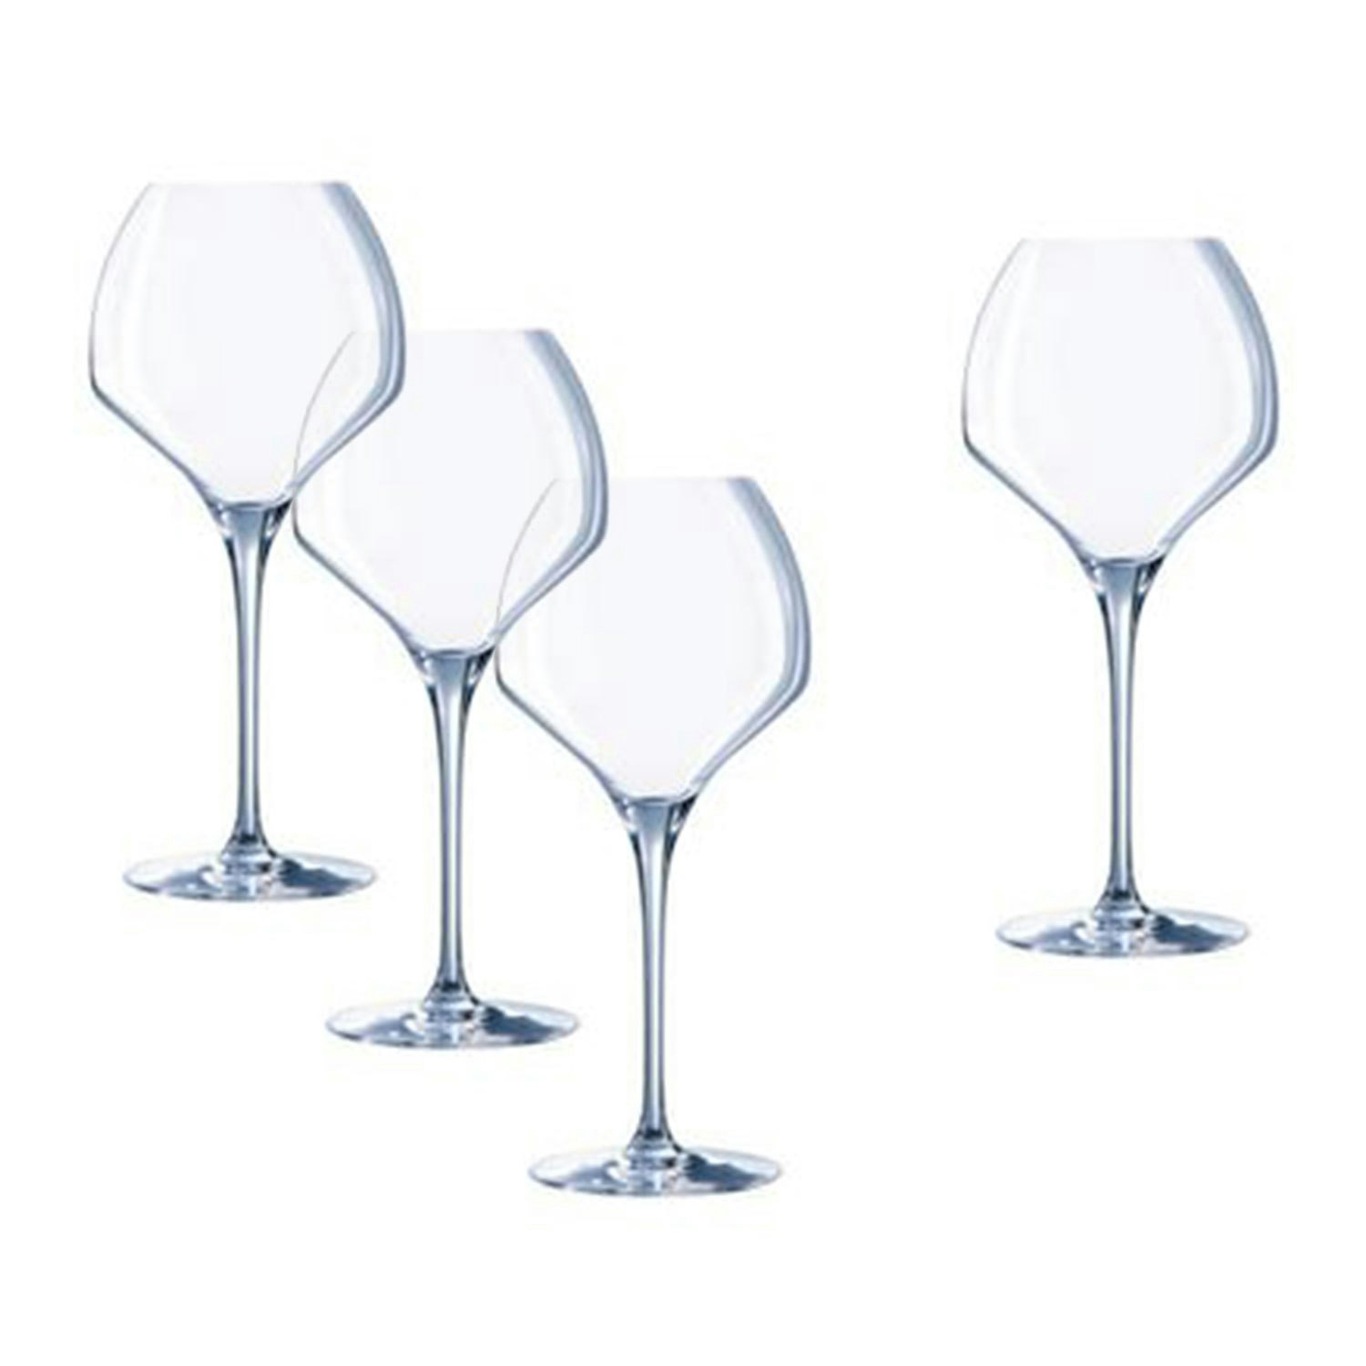 https://royaldesign.com/image/2/chefsommelier-open-up-red-wine-glass-47-cl-4-pack-0?w=800&quality=80